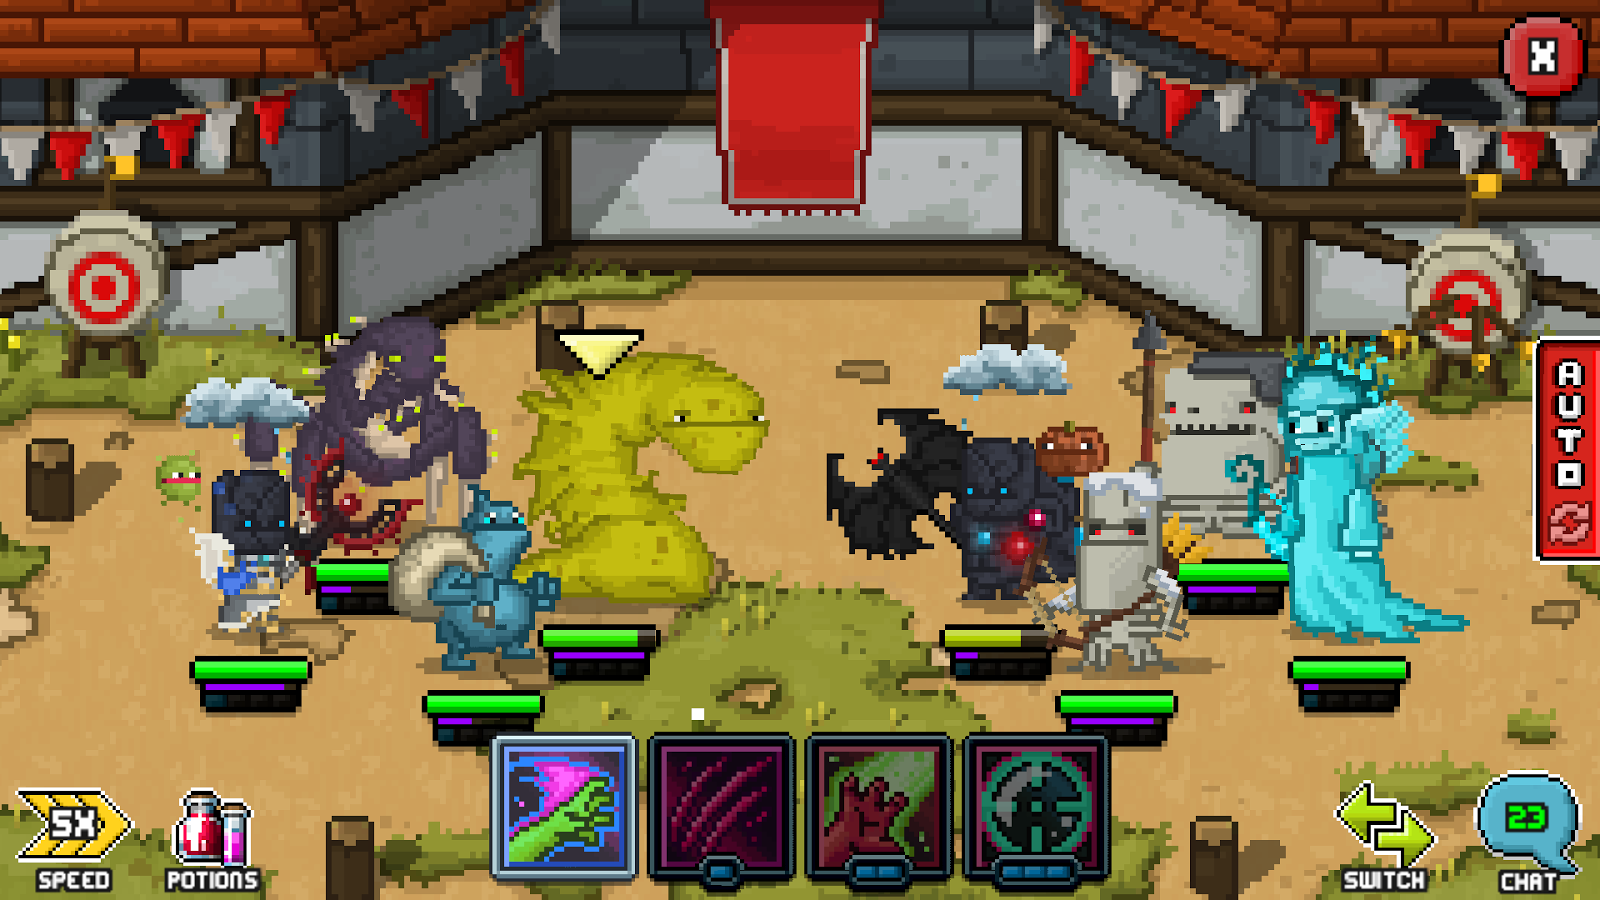 Bit Heroes dungeon crawler launches on Steam